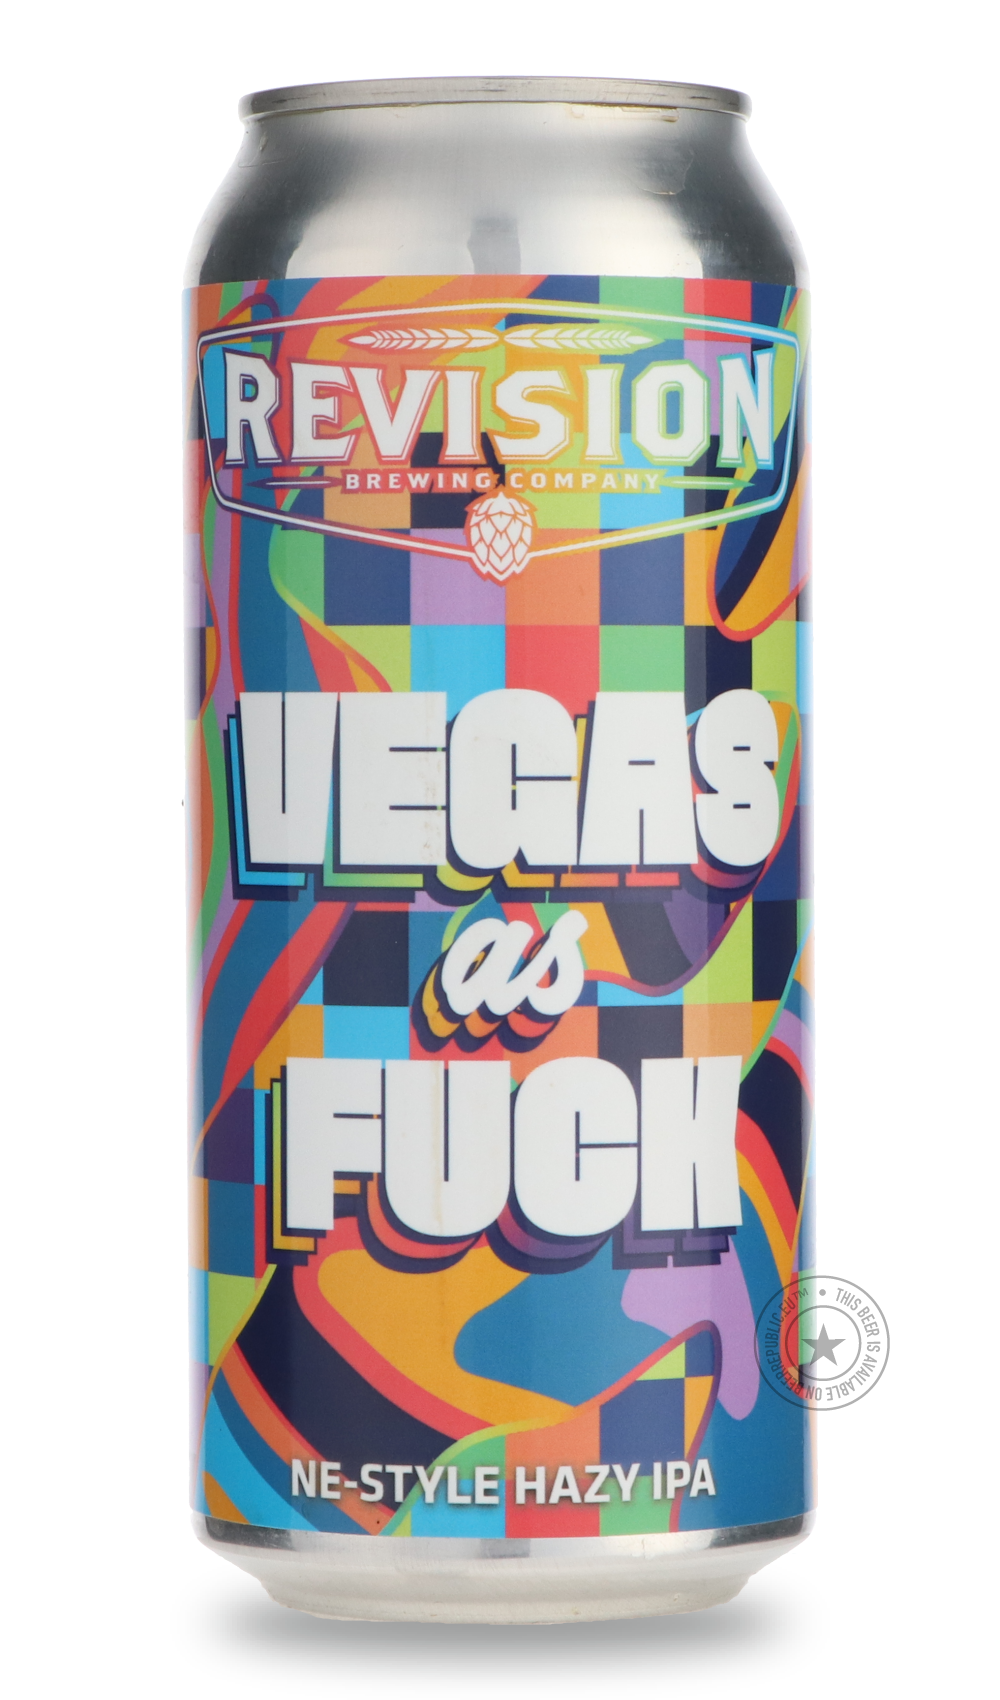 -Revision- Vegas As Fuck-IPA- Only @ Beer Republic - The best online beer store for American & Canadian craft beer - Buy beer online from the USA and Canada - Bier online kopen - Amerikaans bier kopen - Craft beer store - Craft beer kopen - Amerikanisch bier kaufen - Bier online kaufen - Acheter biere online - IPA - Stout - Porter - New England IPA - Hazy IPA - Imperial Stout - Barrel Aged - Barrel Aged Imperial Stout - Brown - Dark beer - Blond - Blonde - Pilsner - Lager - Wheat - Weizen - Amber - Barley W